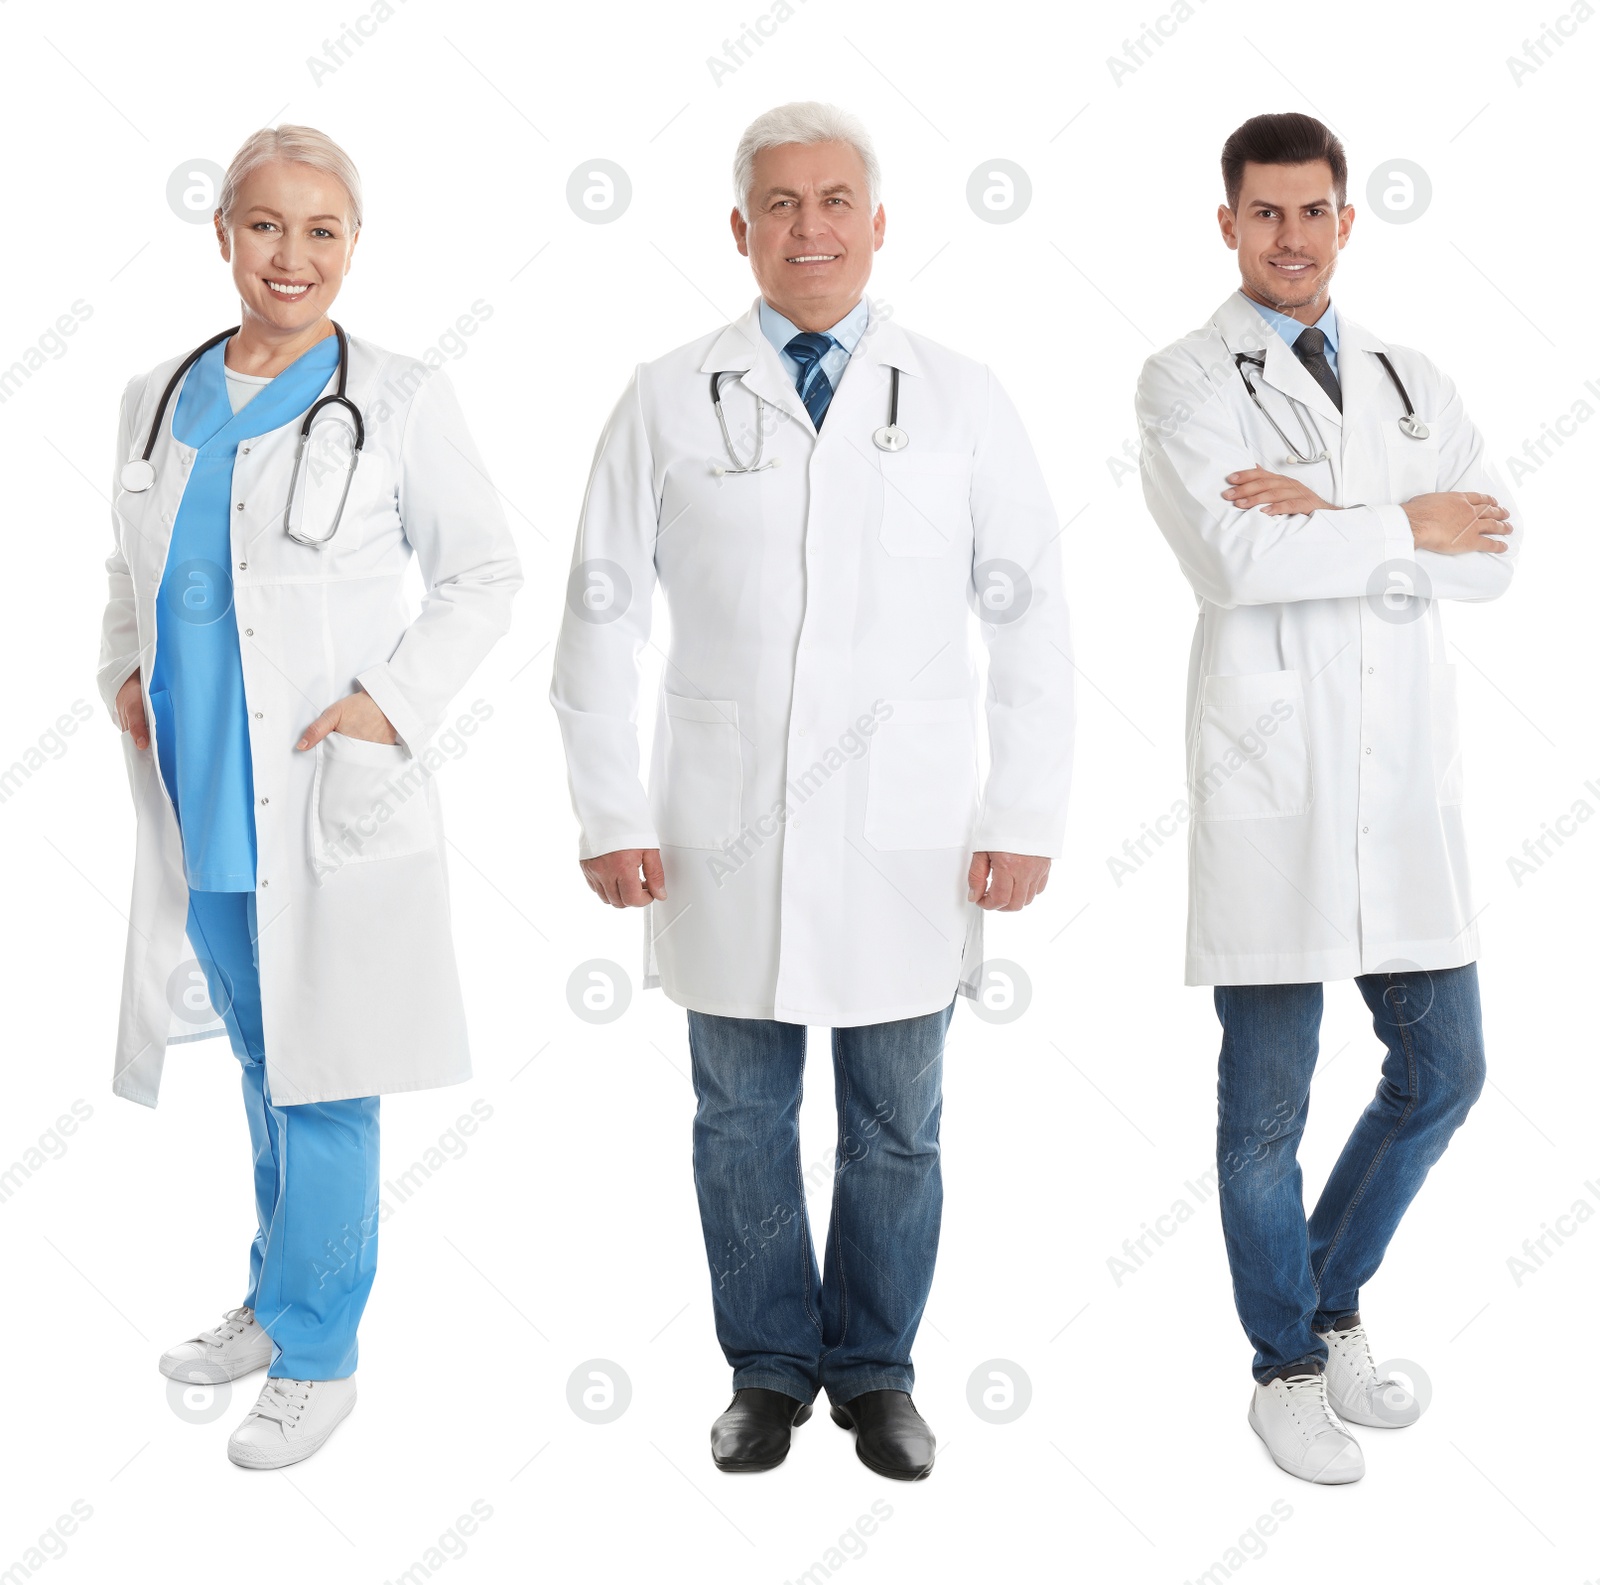 Image of Collage of people in uniforms on white background. Medical staff